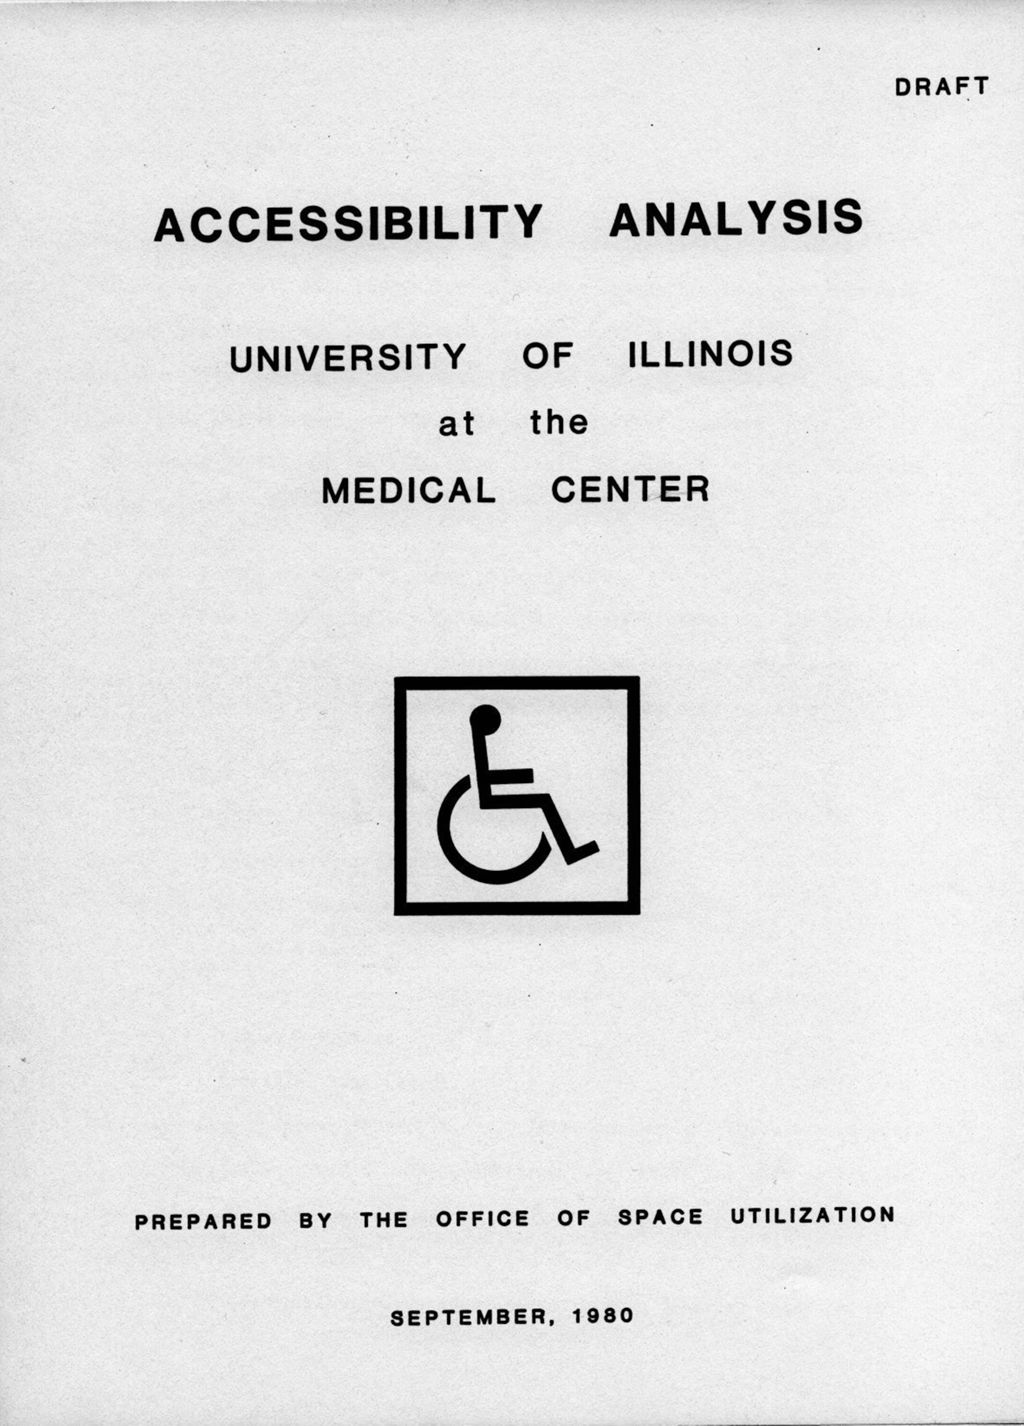 Miniature of Accessibility Analysis, University of Illinois at the Medical Center